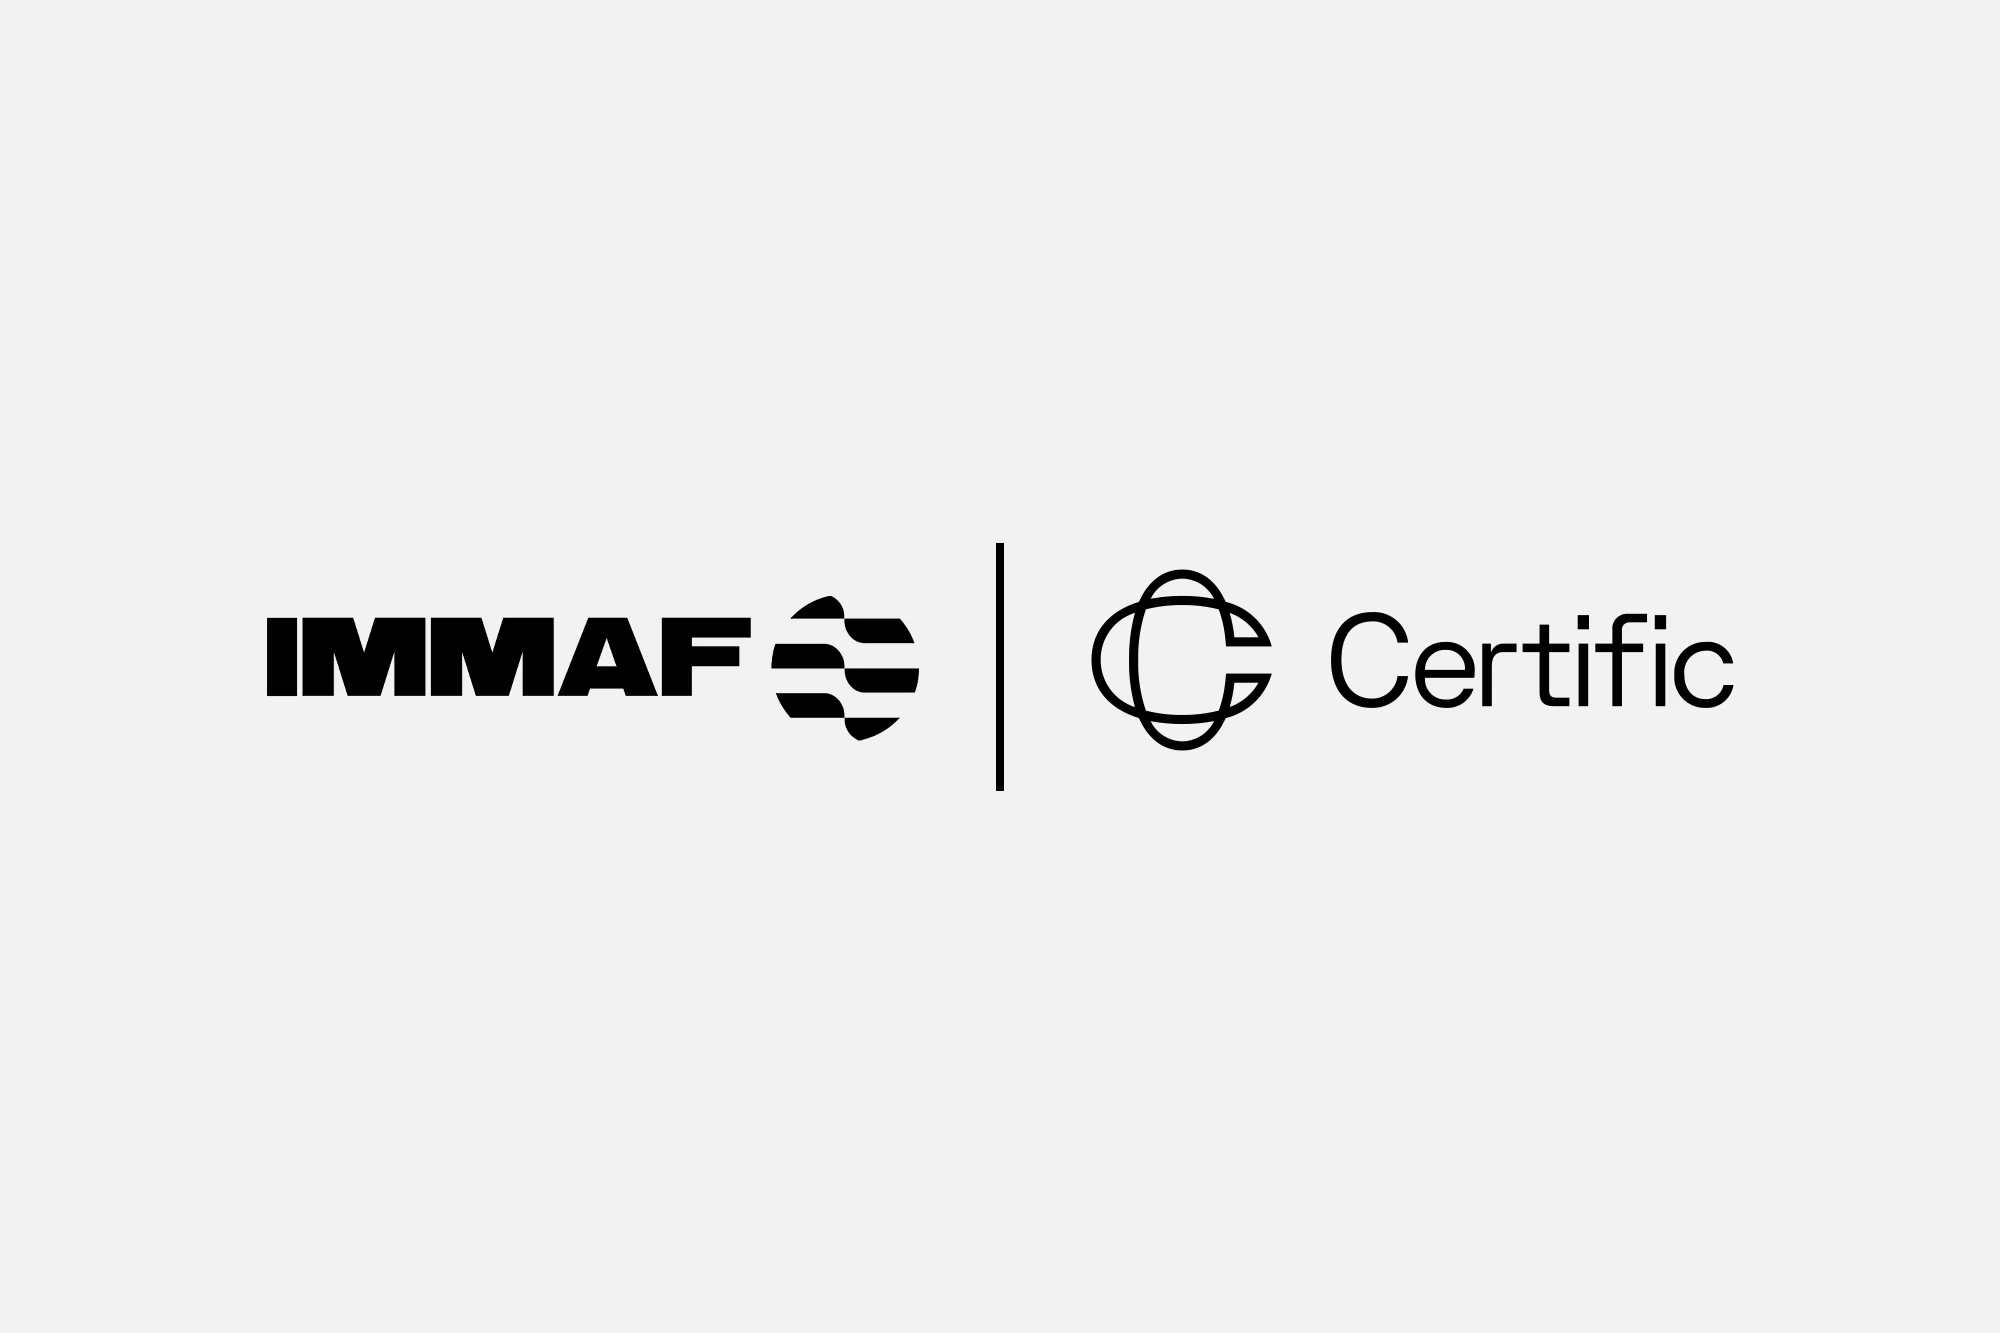 IMMAF strikes partnership with Certific for concussion awareness training